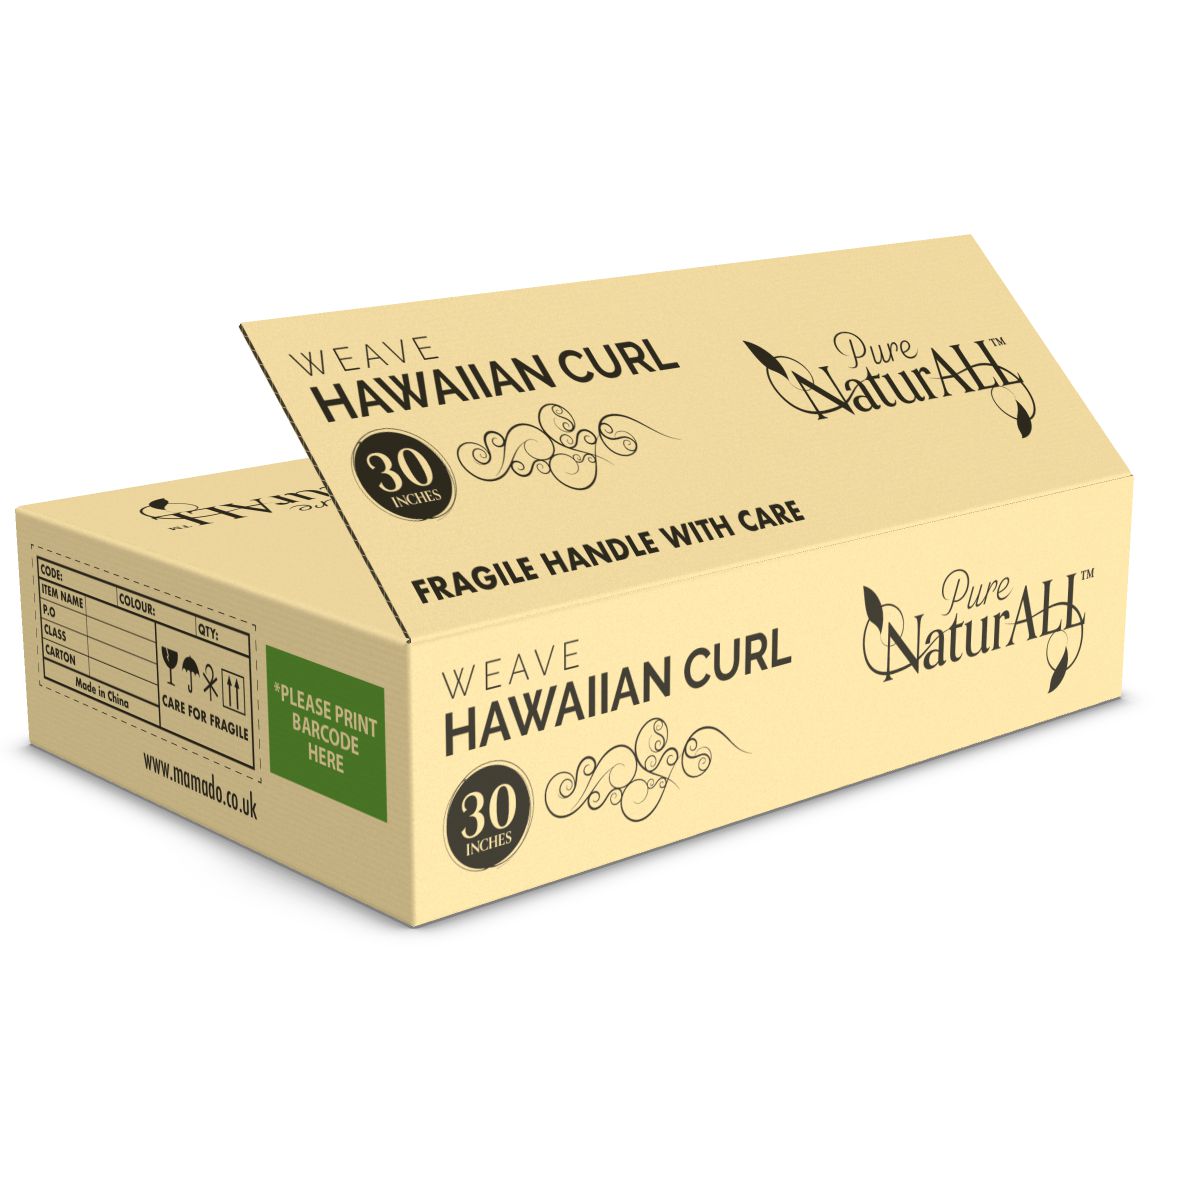 Shipping carton for Hawaiian Curl 30" weave hair for the NaturALL hair brand. Designed by Paul Cartwright Branding.